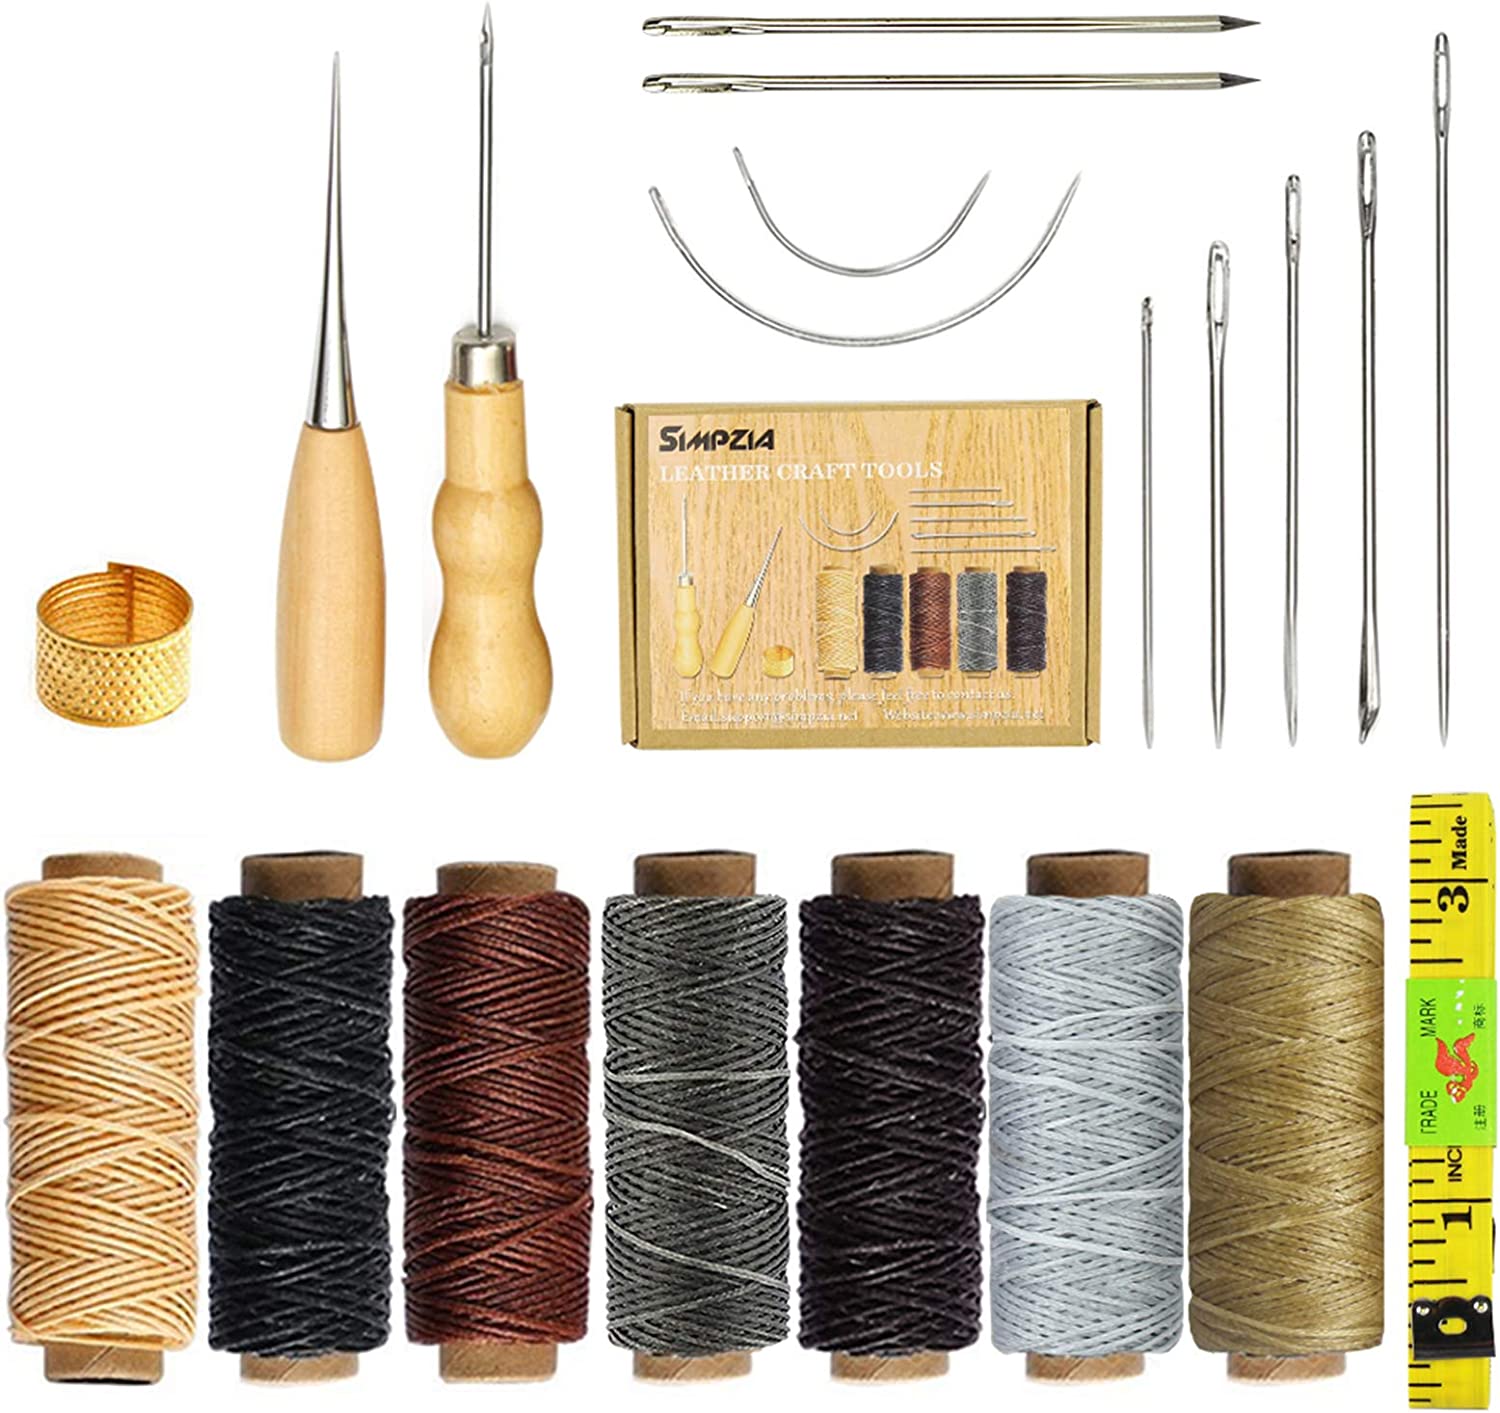 Tools for leather craft. Kit 100. Iron scale`s set. Size of pattern